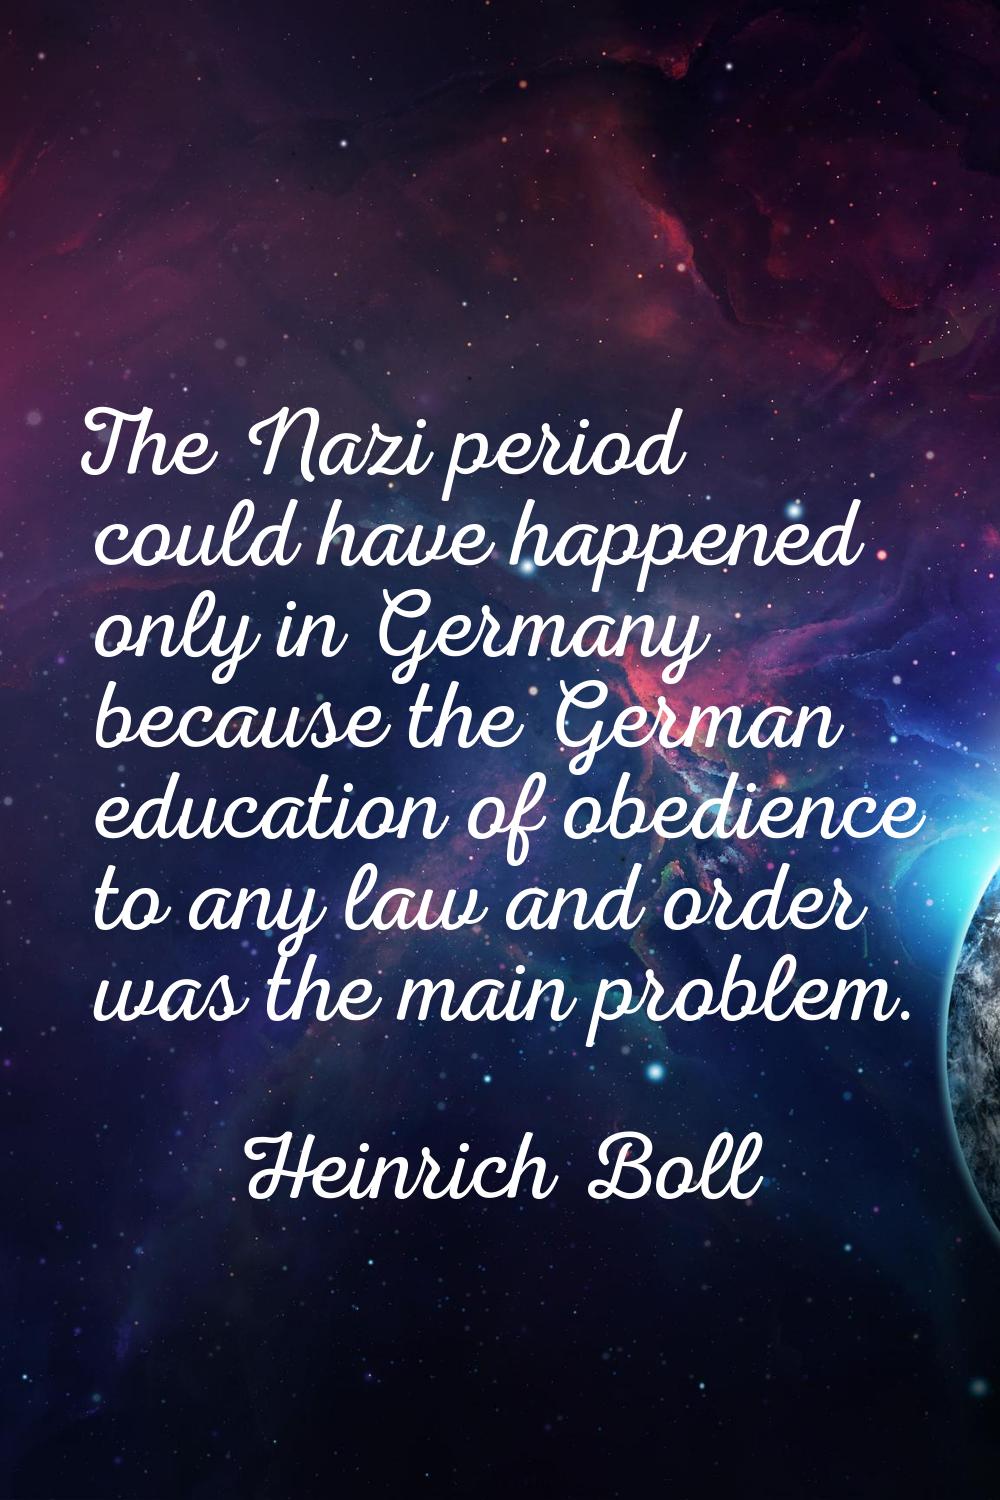 The Nazi period could have happened only in Germany because the German education of obedience to an